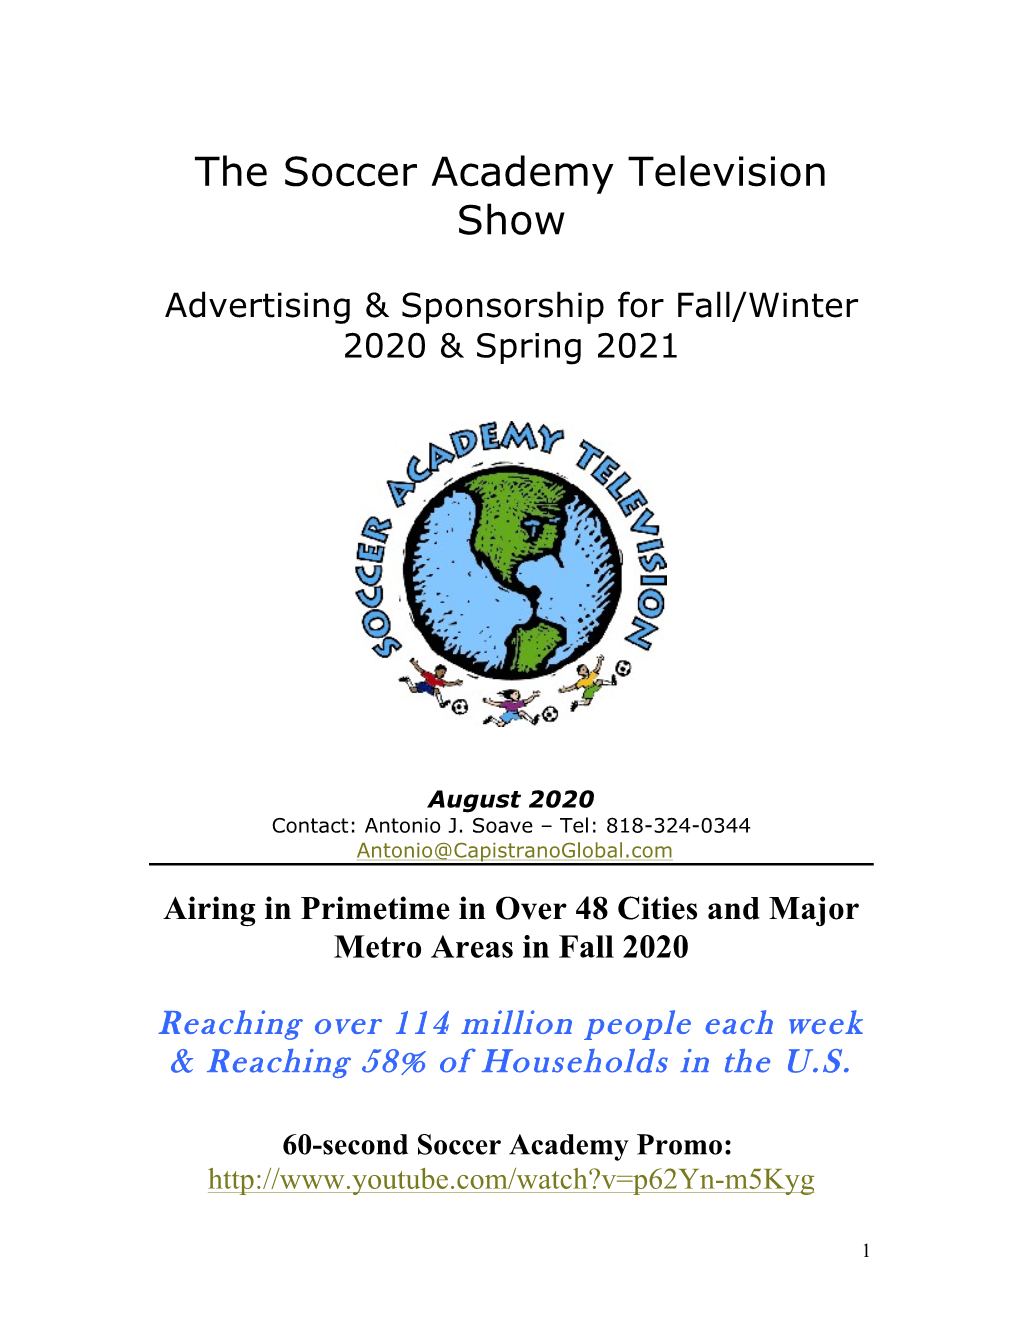 The Soccer Academy Television Show